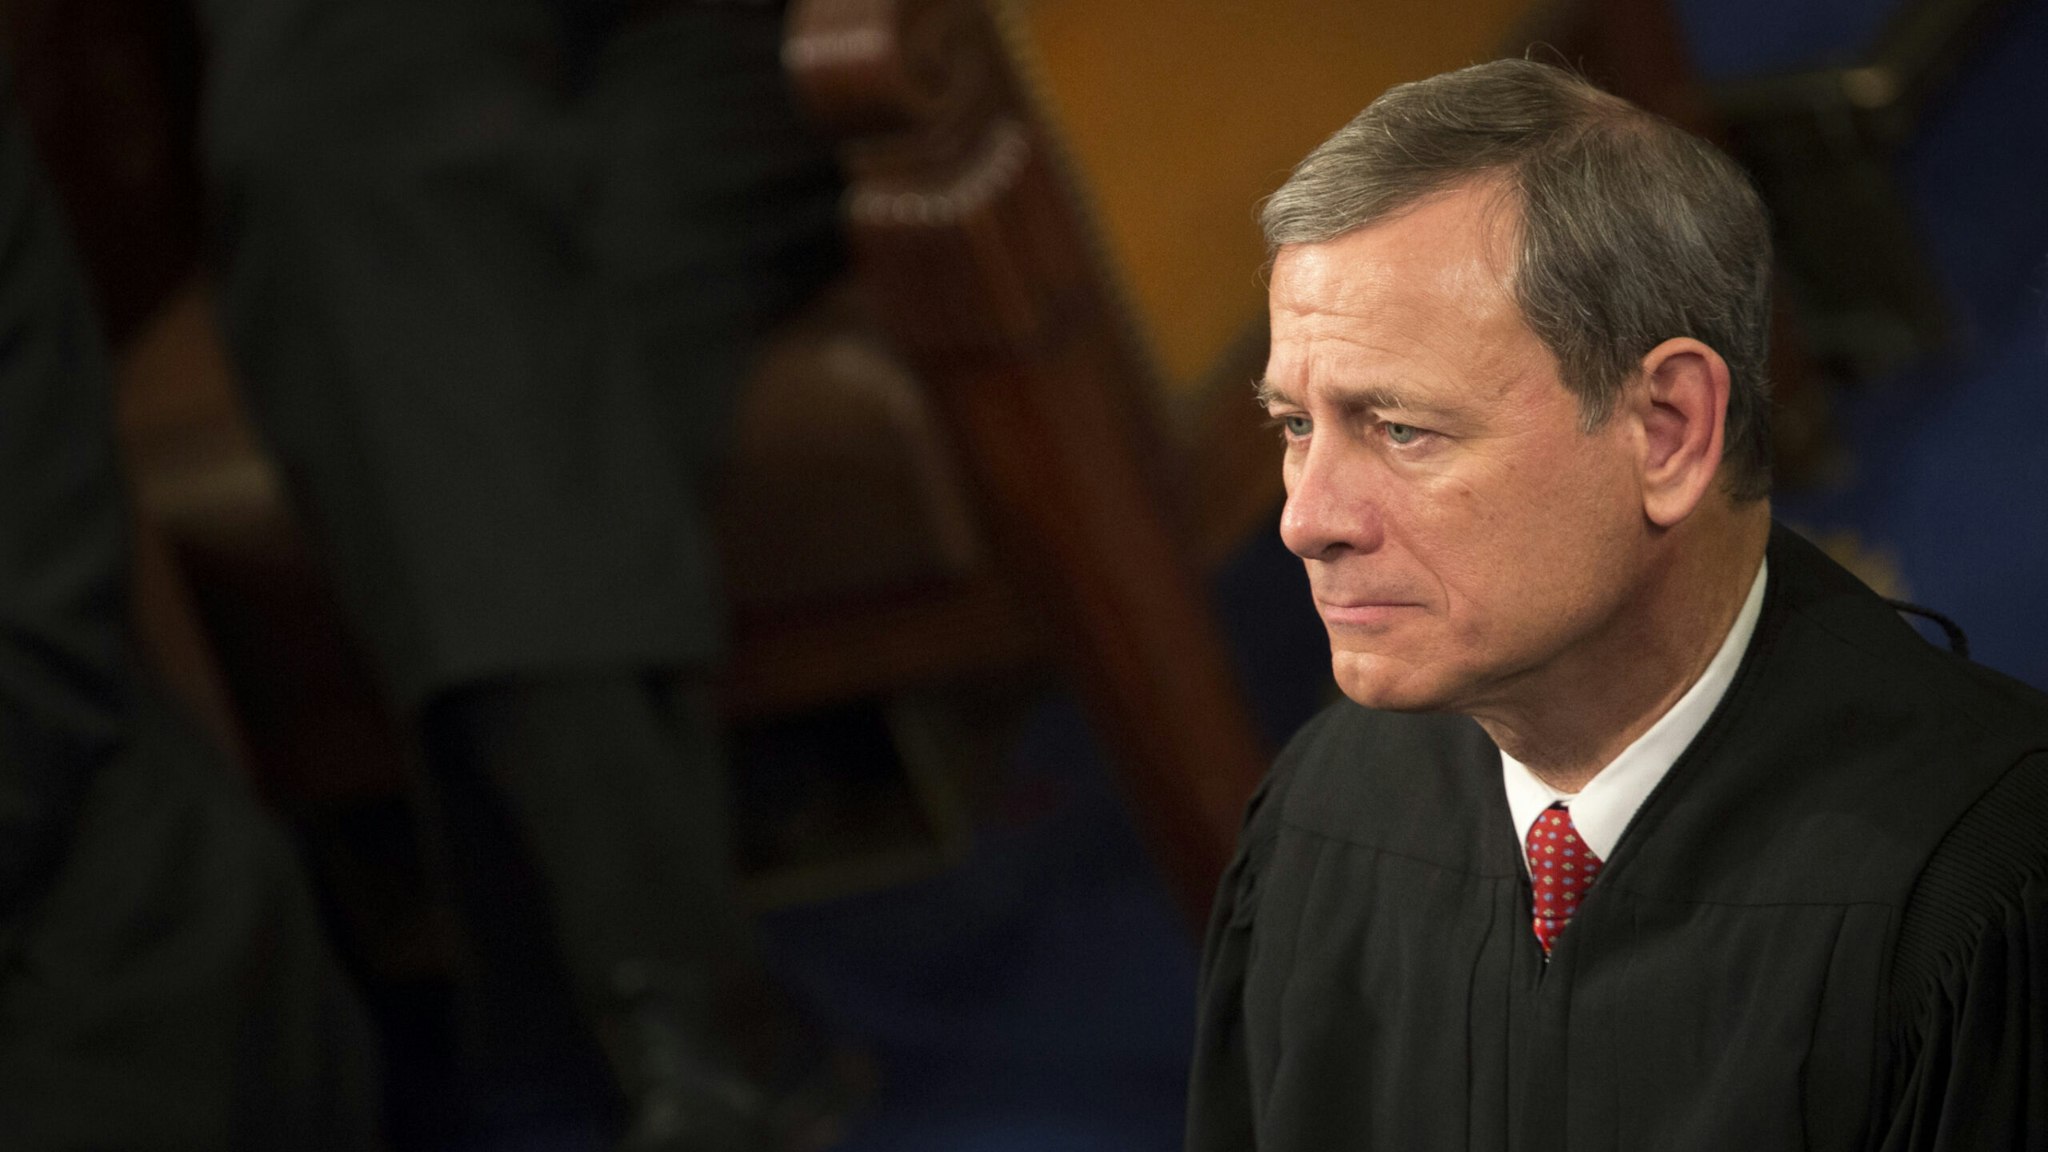 Chief Supreme Court Justice John Roberts listens as U.S. President Barack Obama delivers the State of the Union address to a joint session of Congress at the Capitol in Washington, D.C., U.S., on Tuesday, Jan. 12, 2016.